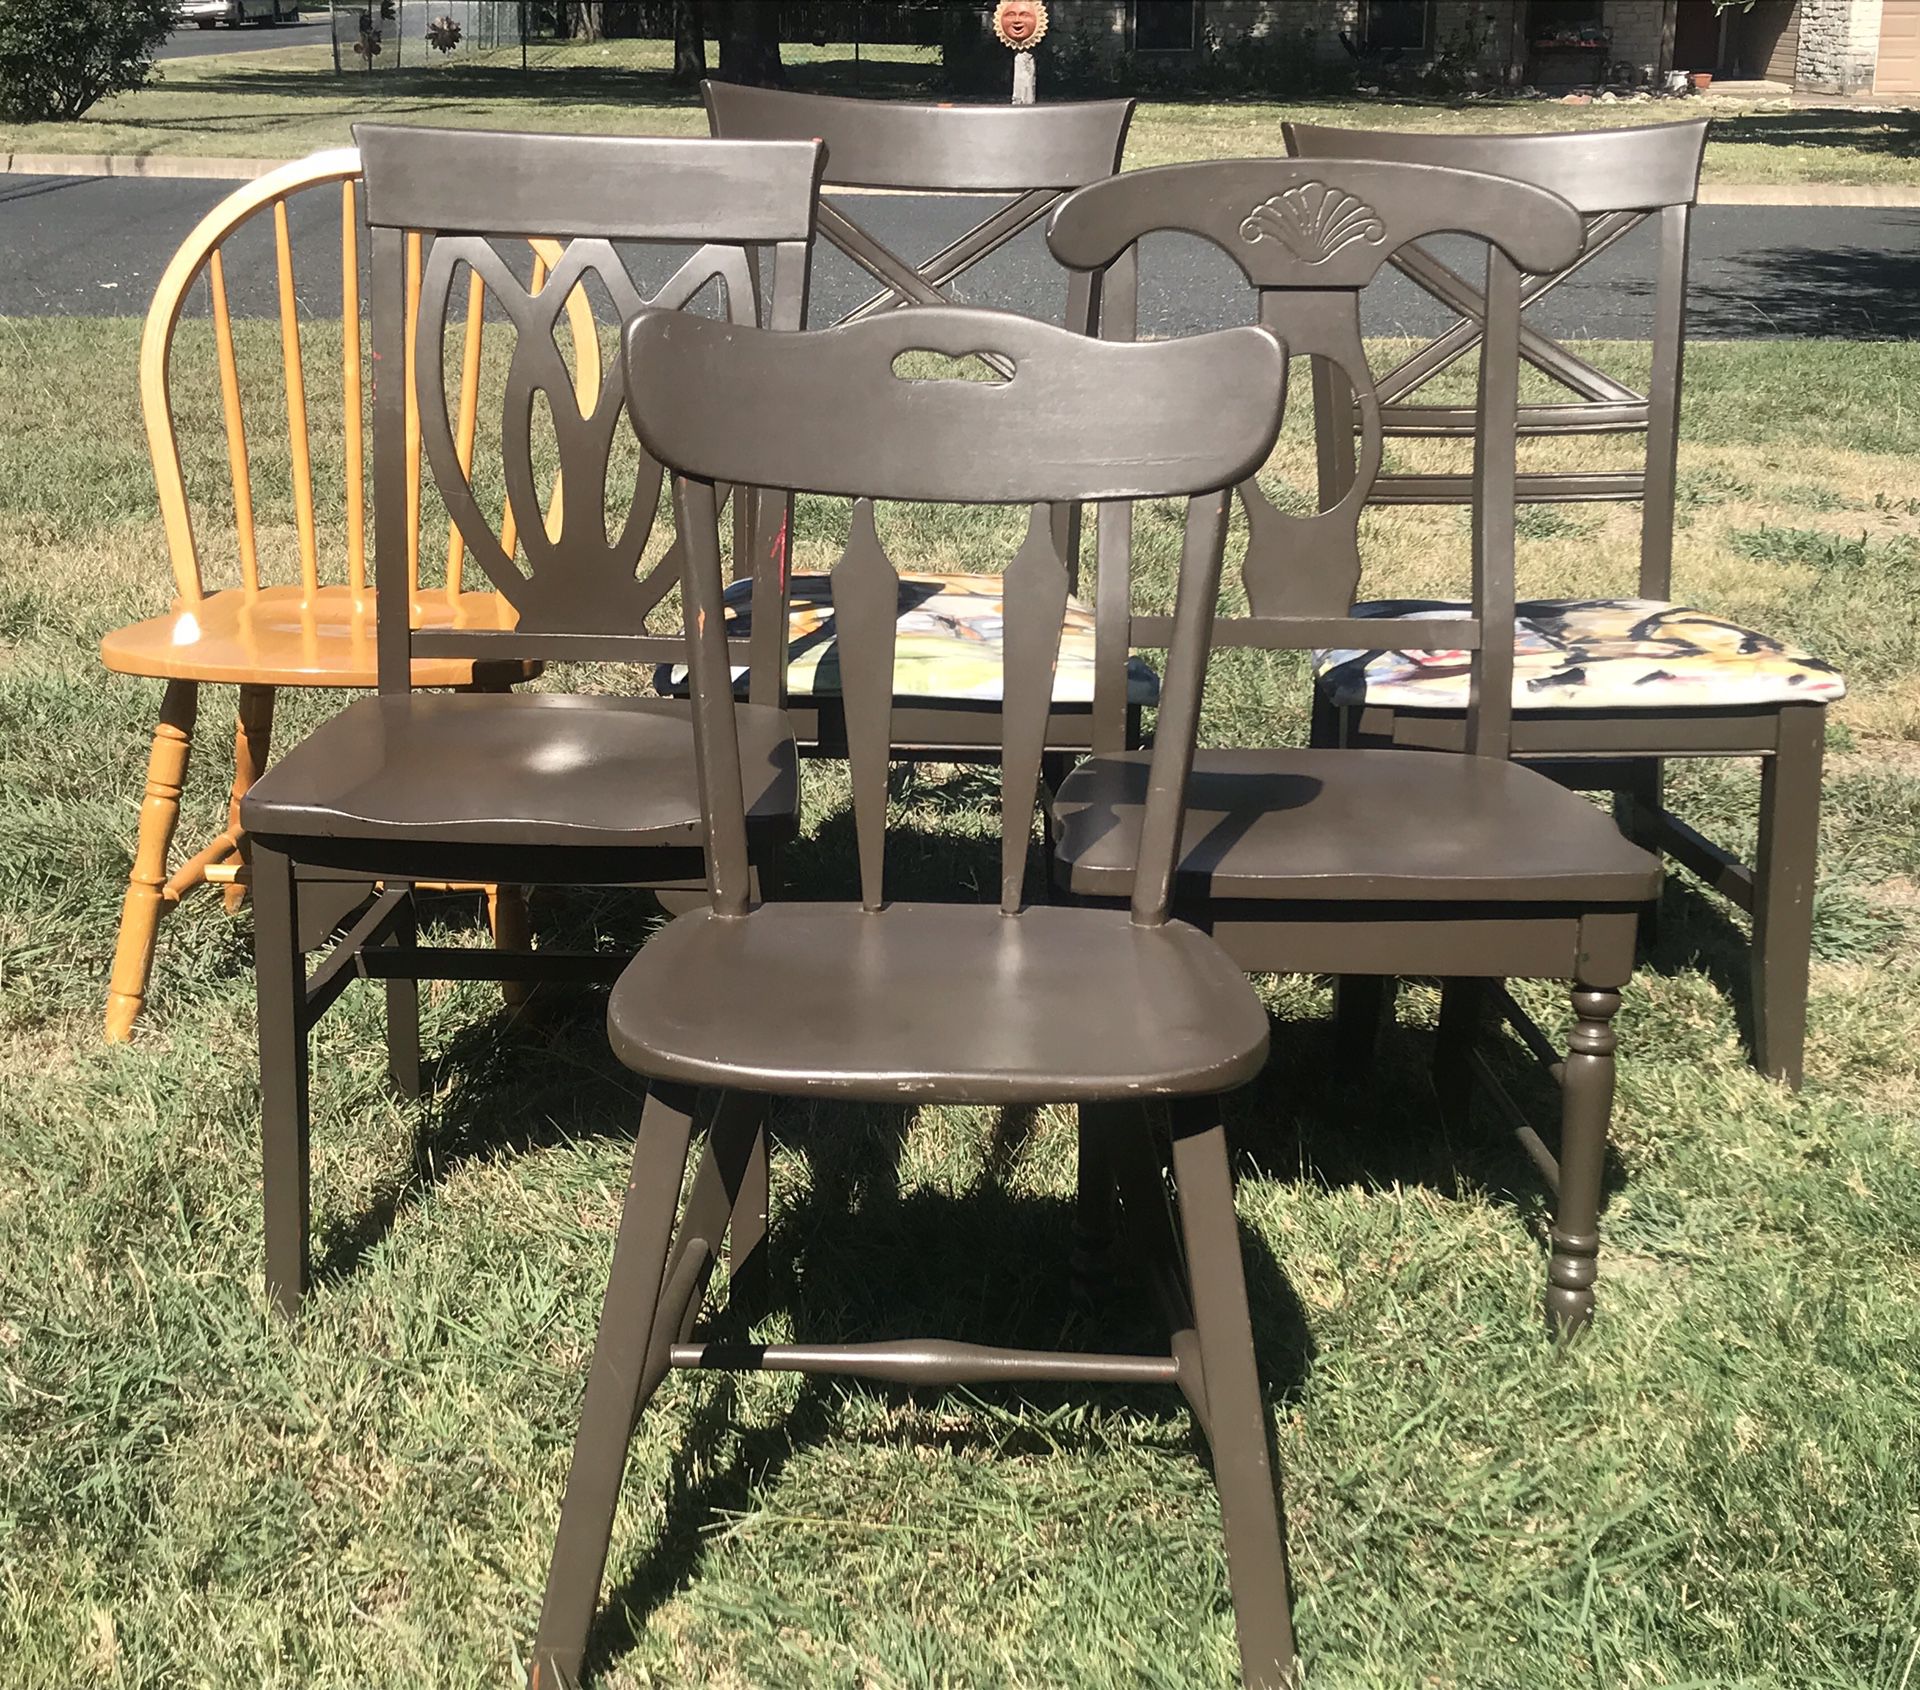 Dining room chairs (set of 6)